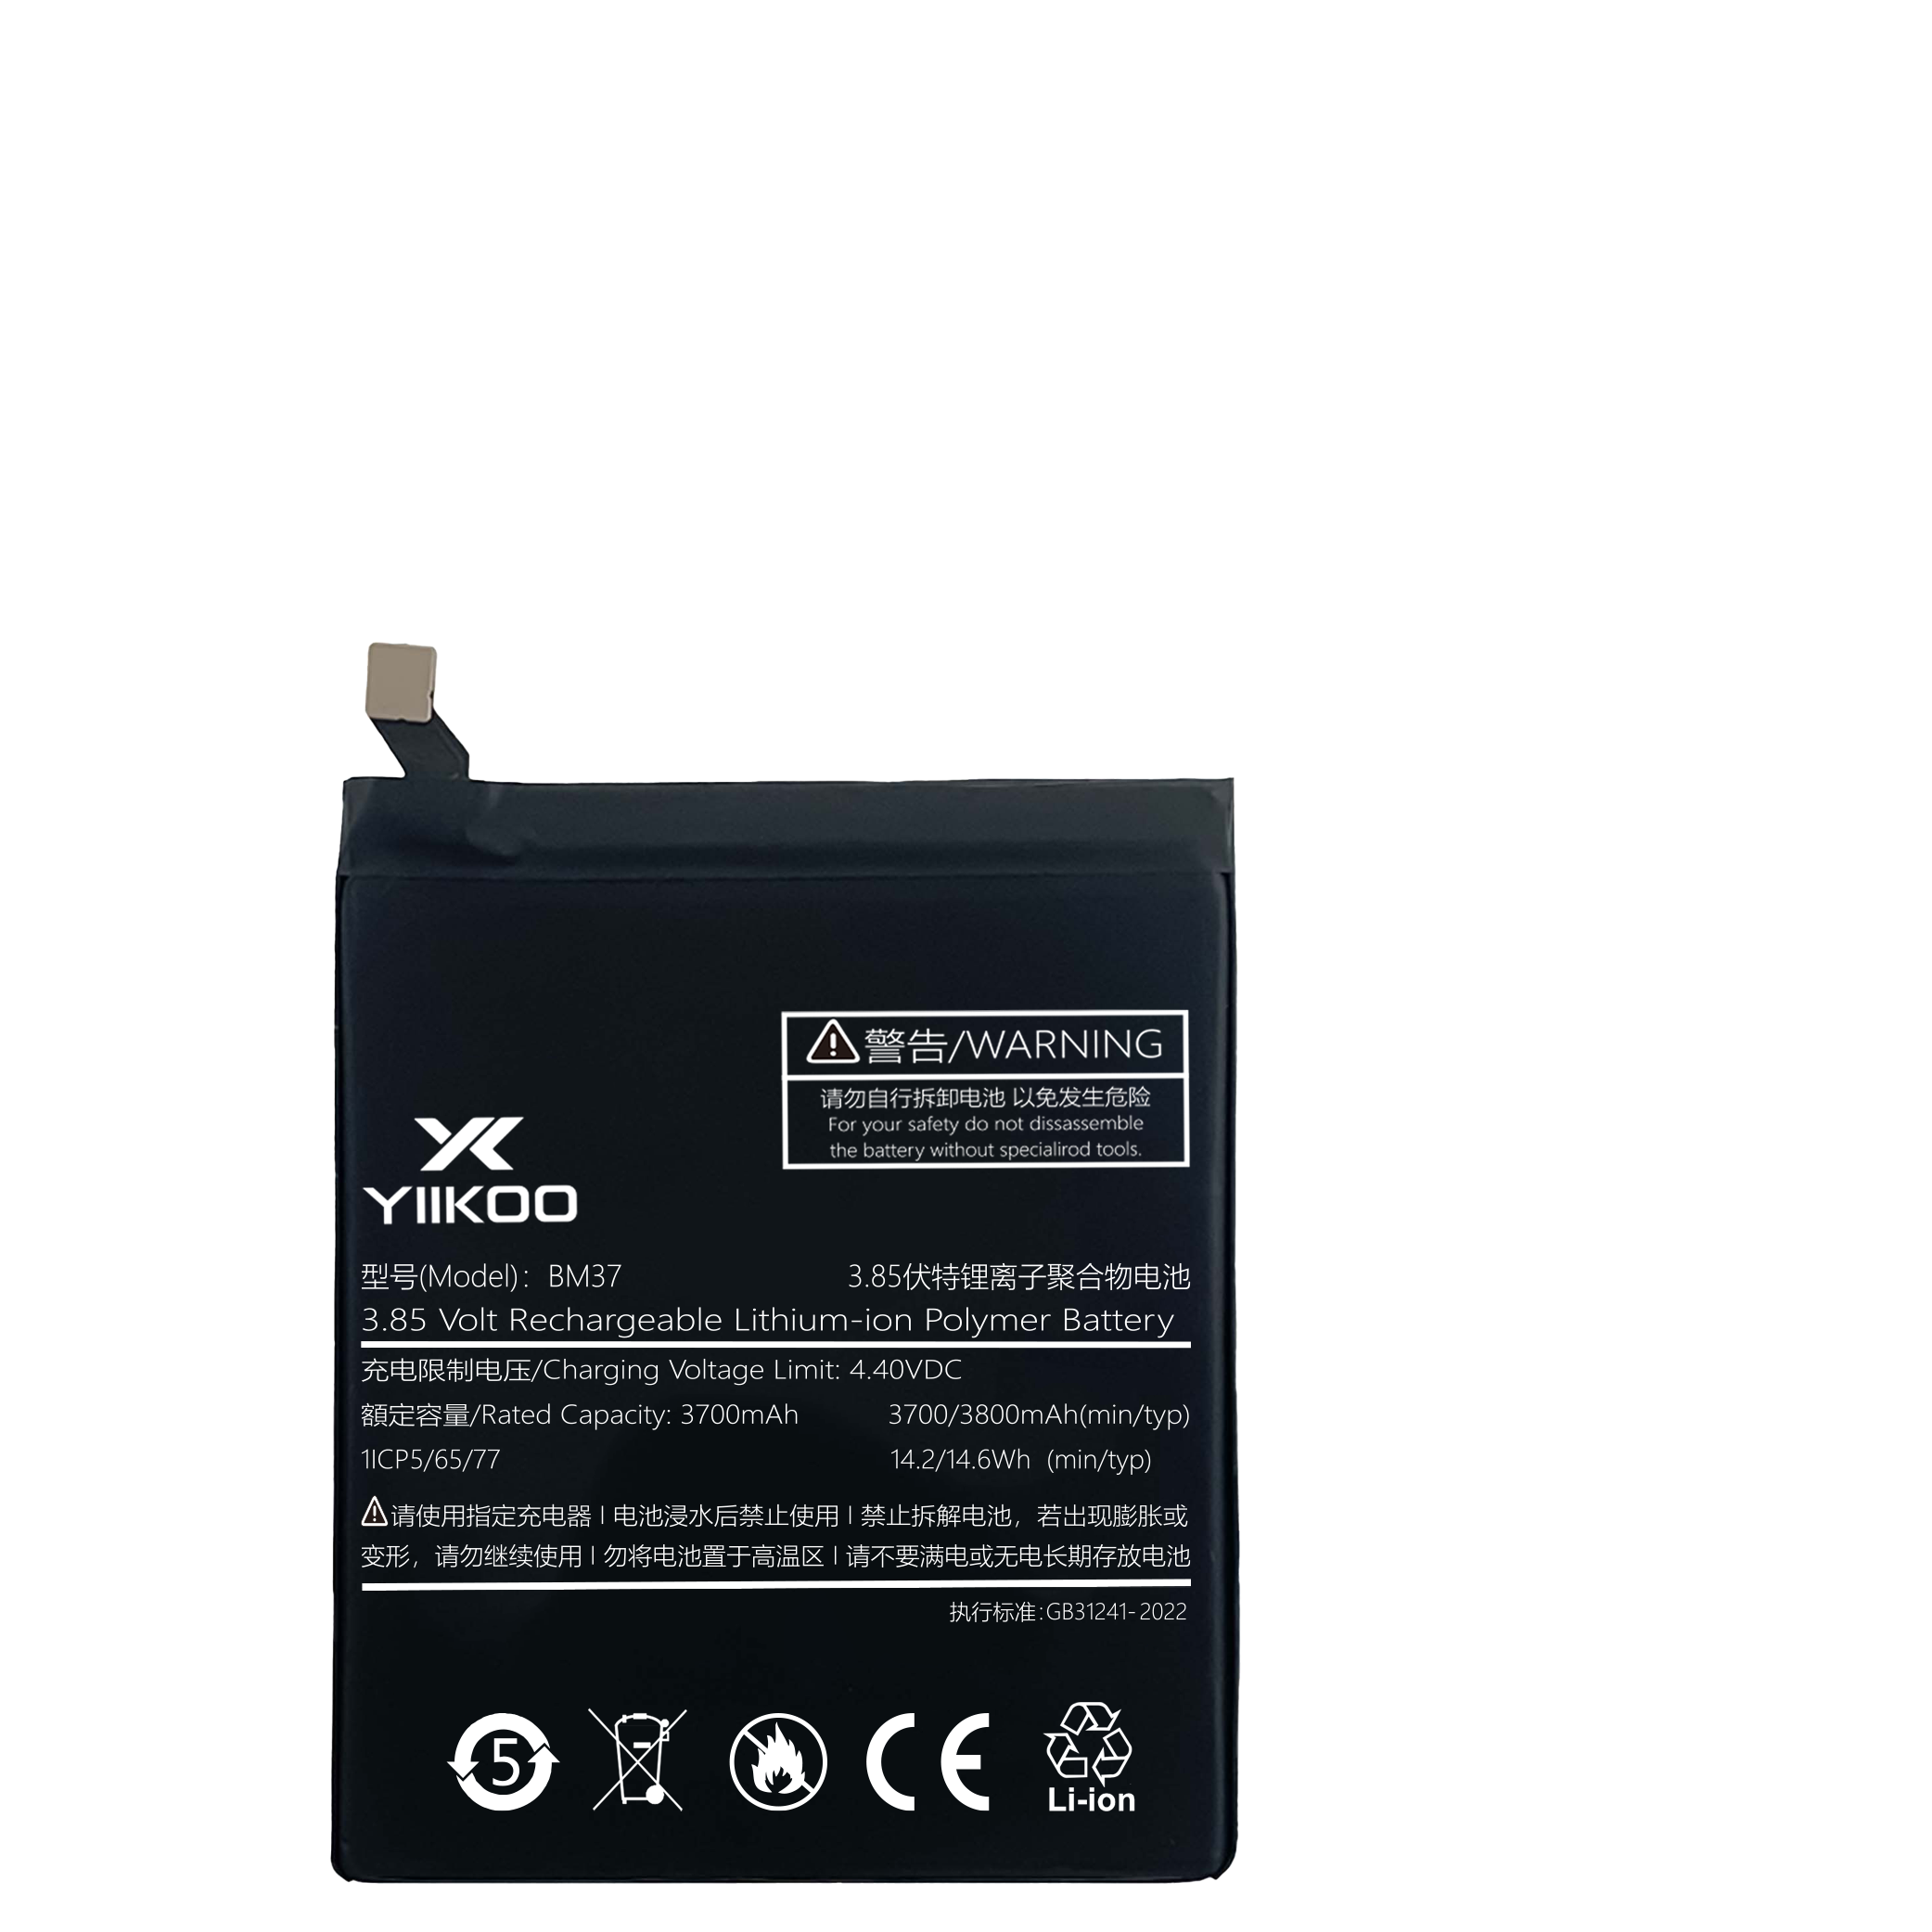 High-Quality Replacement Battery for Your Smartphone